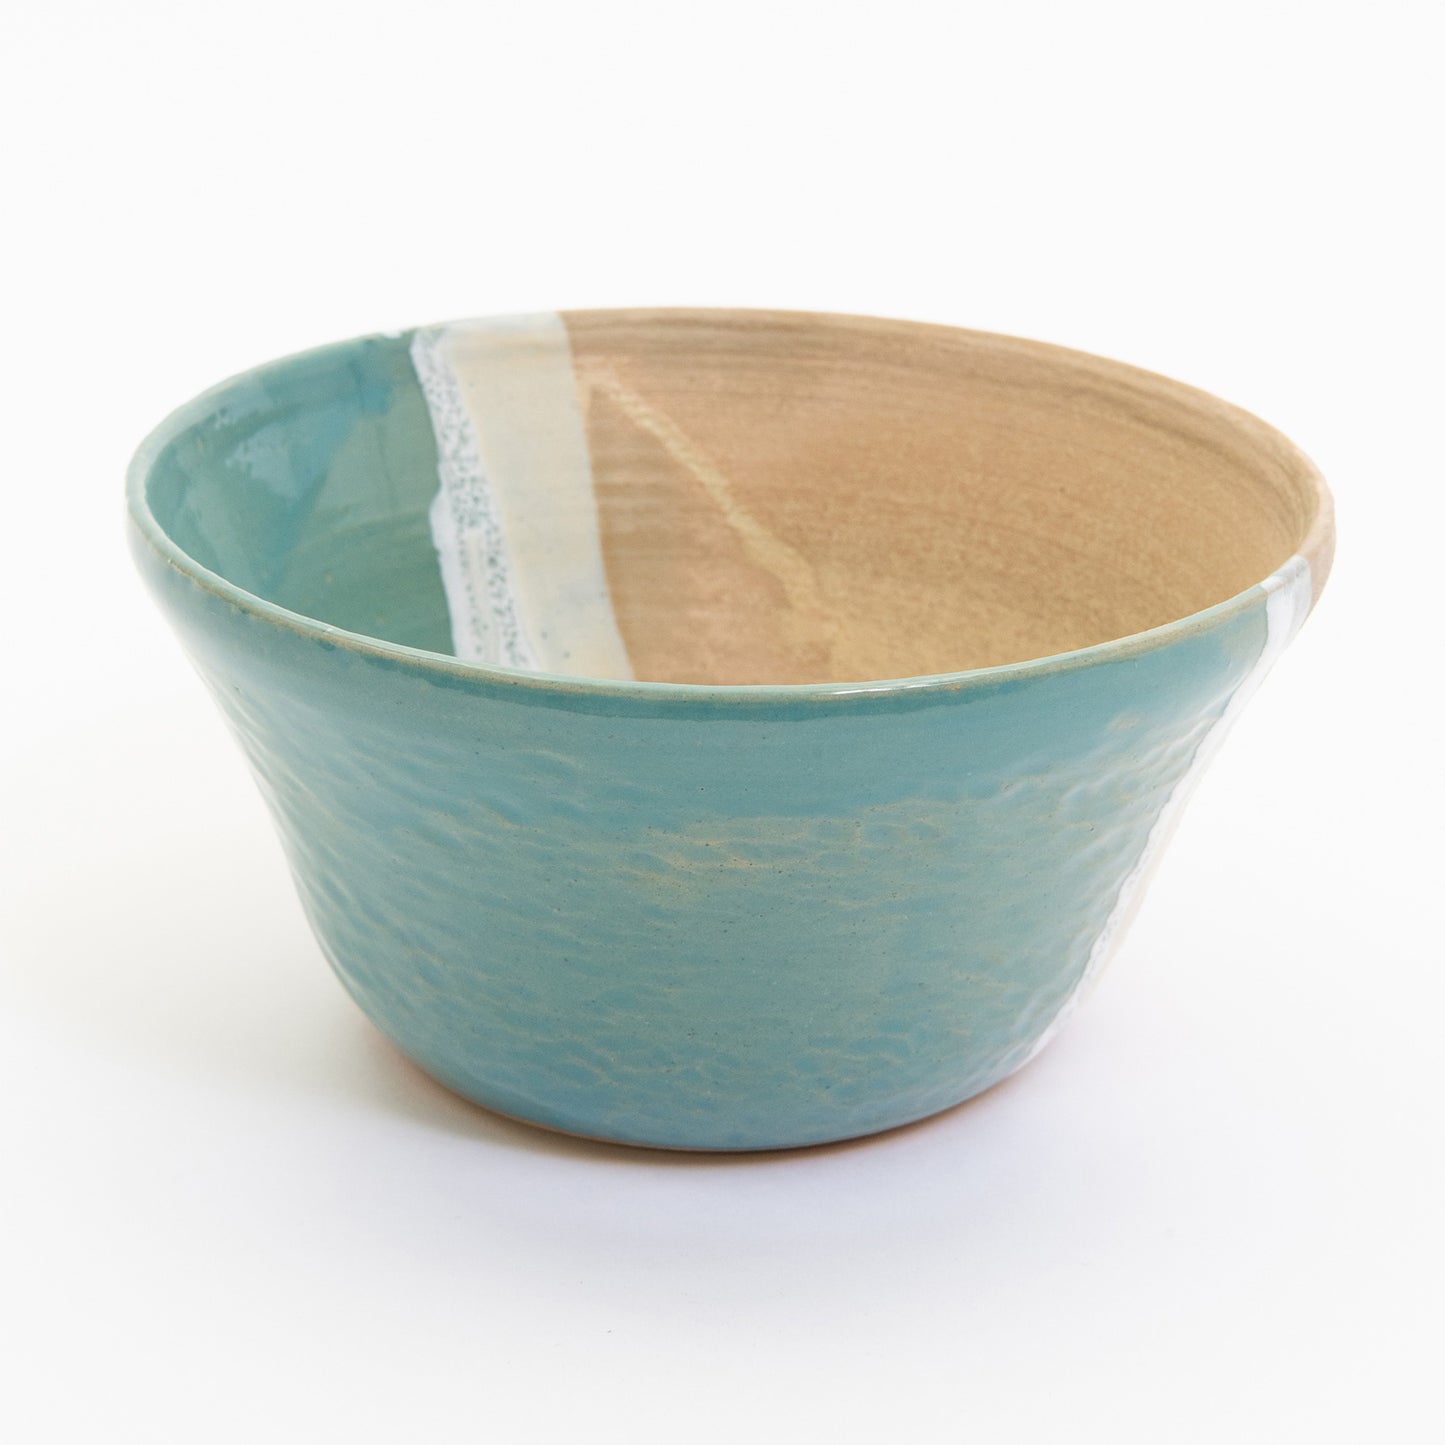 A bowl pictured on a white background. The bowl has an ocean shoreline design, with the sea, a wave, and the sand across it.